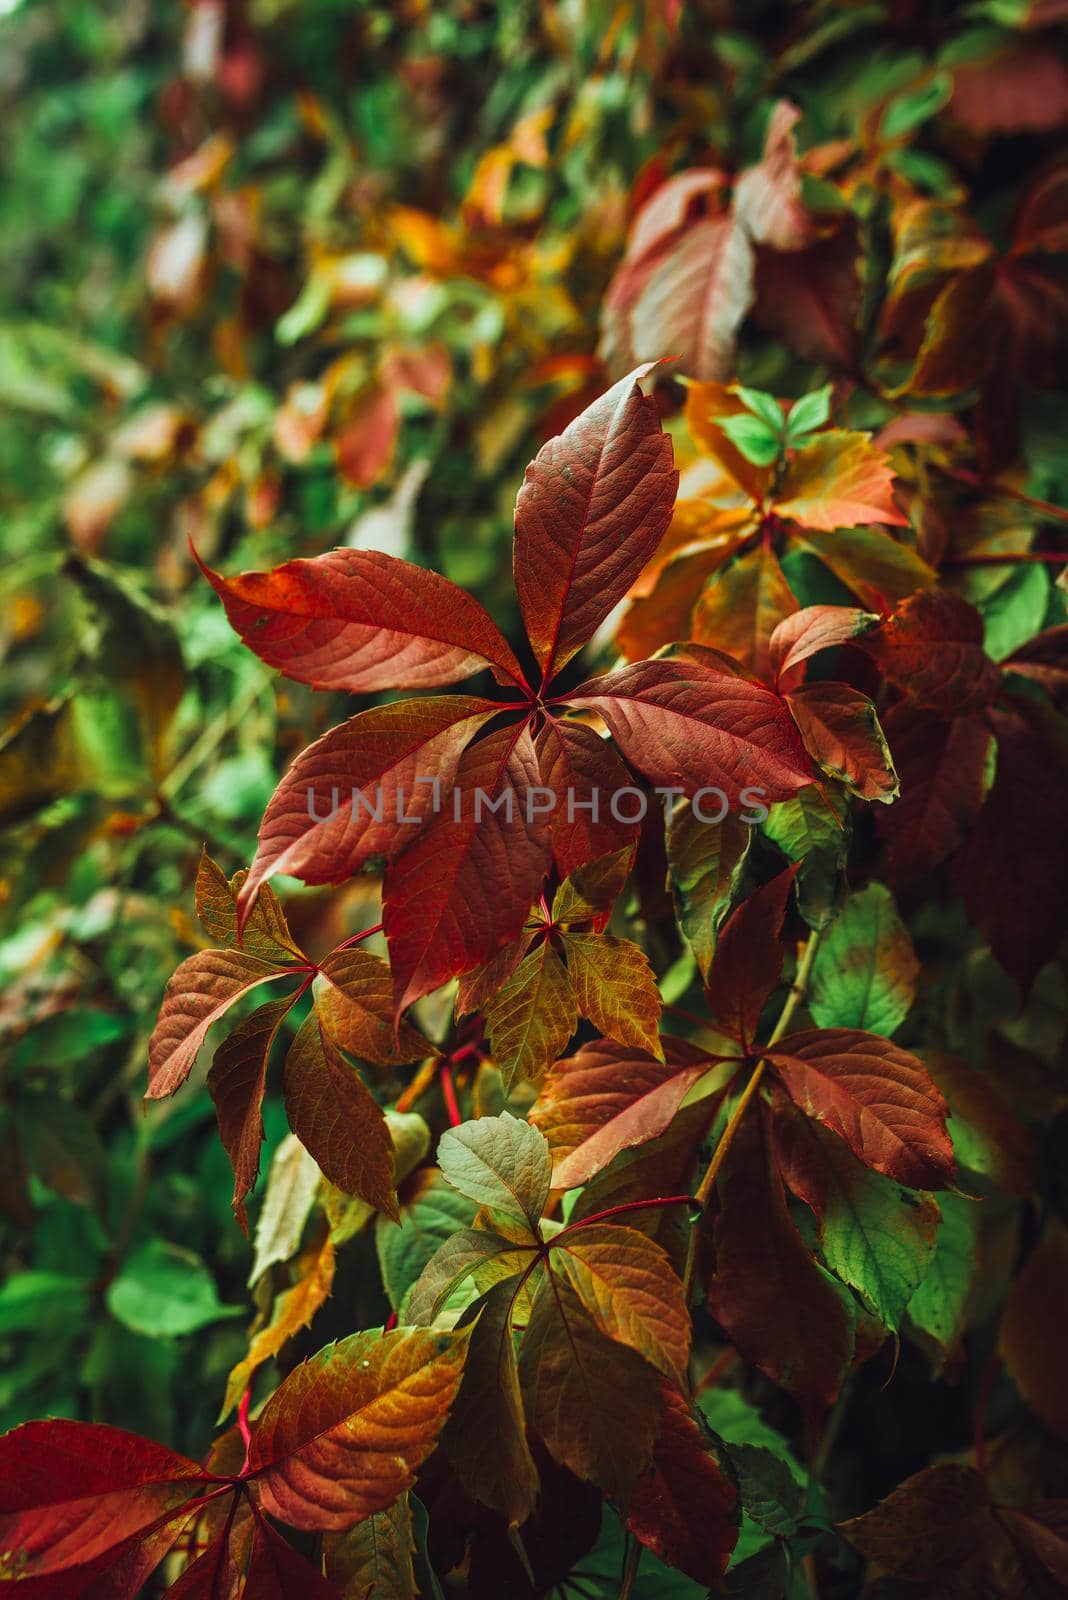 Colorful nature backgrounds with autumn leaves. Nature background mixed colors. Red autumn leaves mixed with green